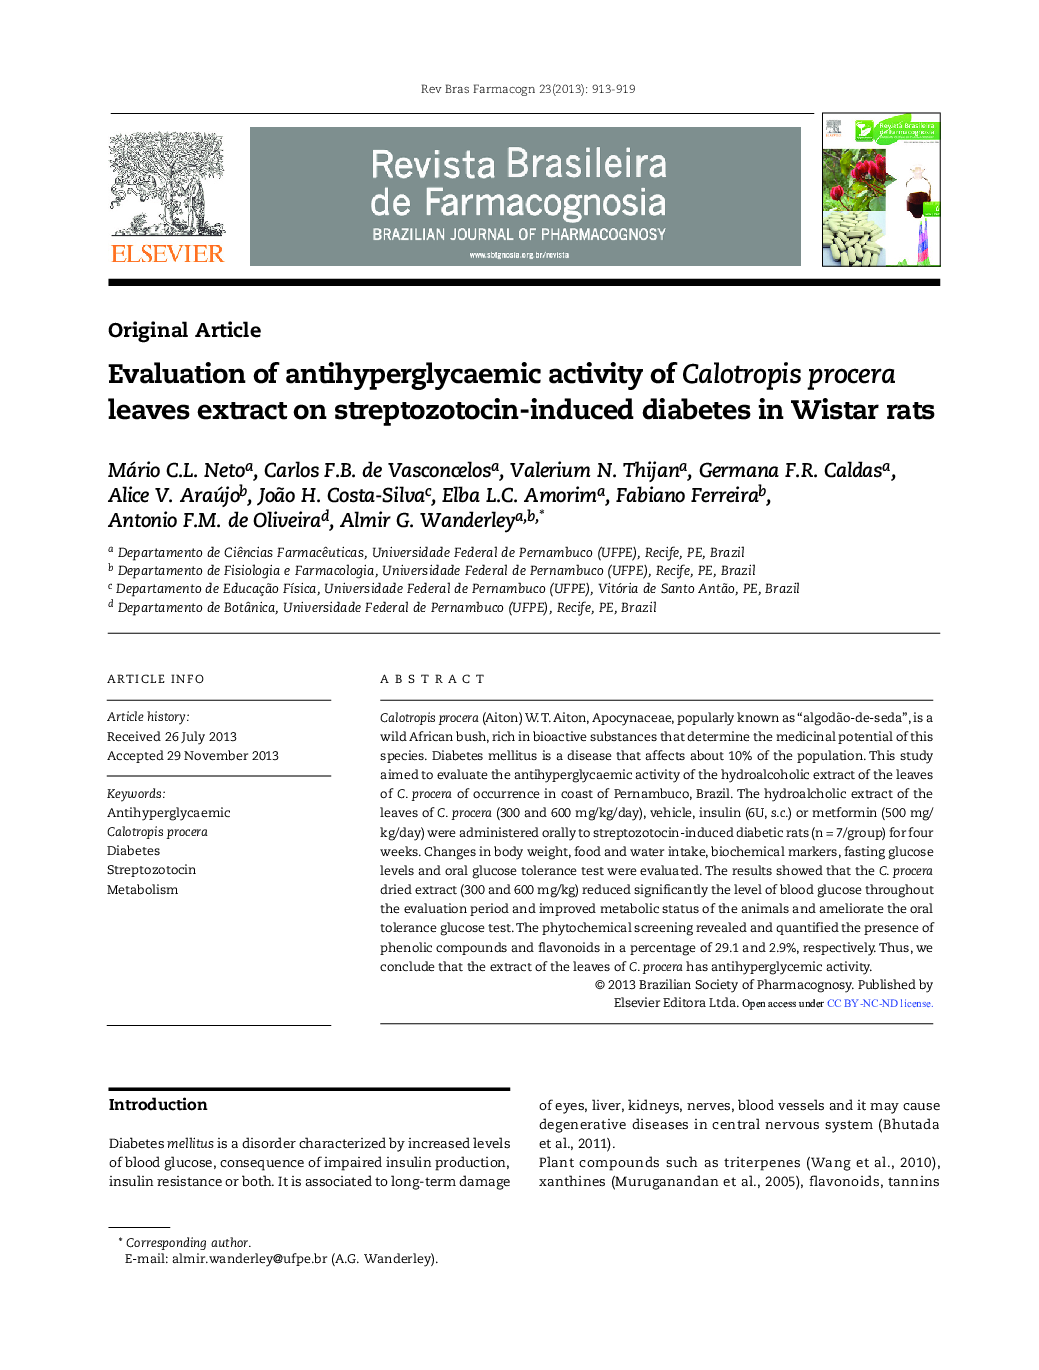 Evaluation of antihyperglycaemic activity of Calotropis procera leaves extract on streptozotocin-induced diabetes in Wistar rats